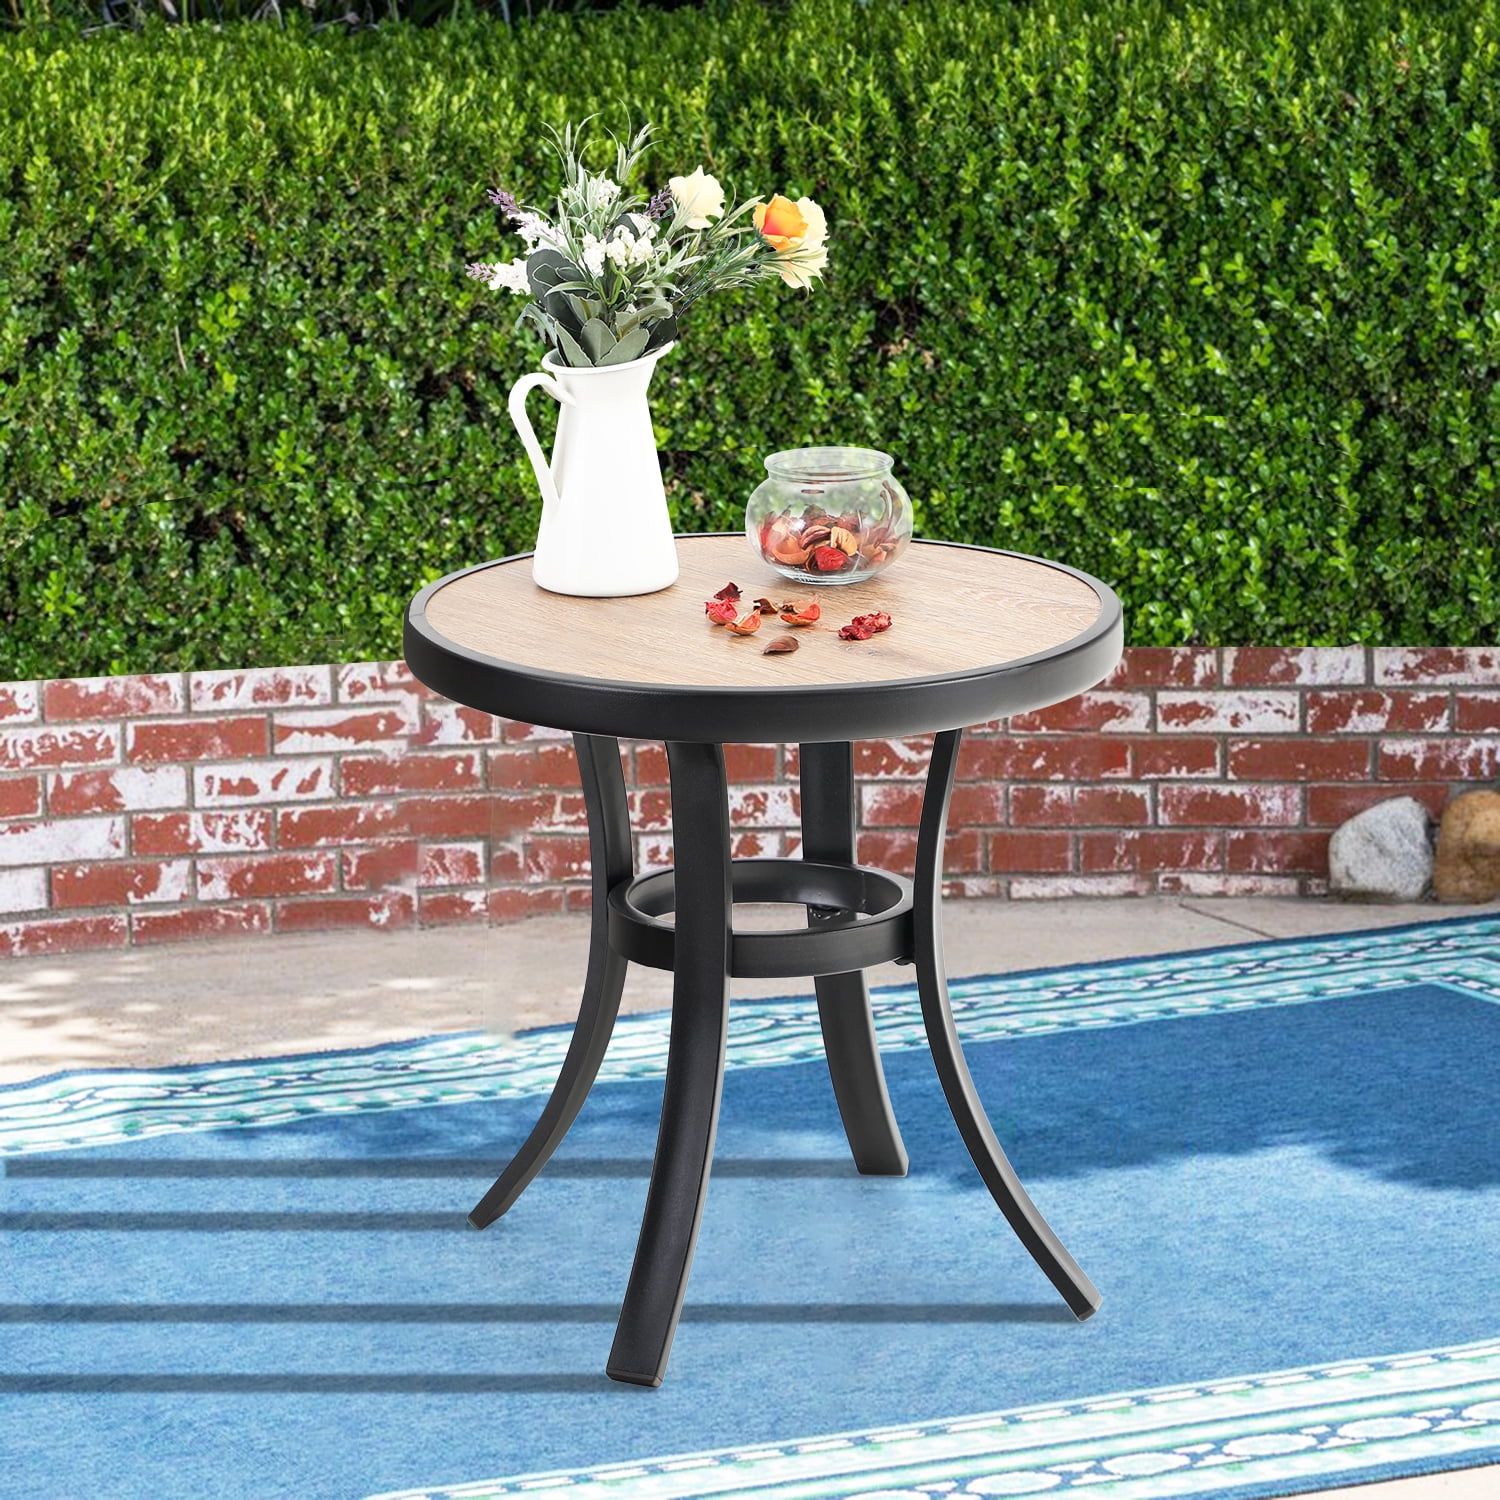 Mf Studio 19 Inches Bistro Side Table, Outdoor Coffee Table Wooden Like Regarding Modern Outdoor Patio Coffee Tables (View 10 of 15)